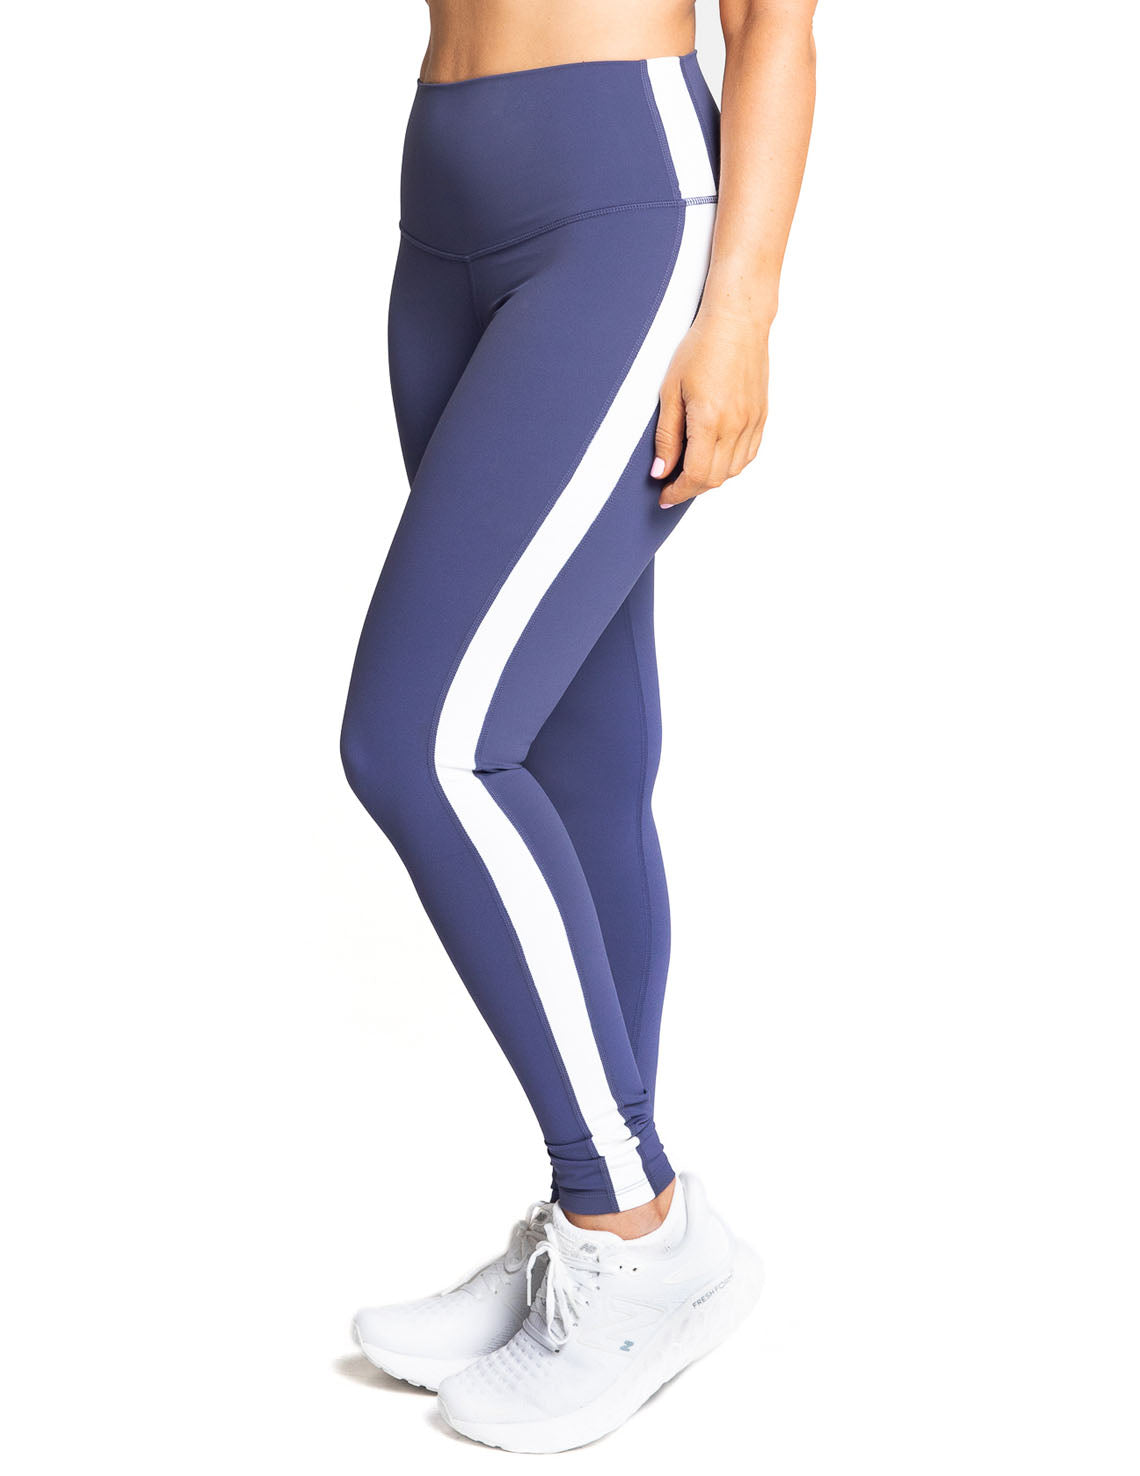 Navy Color Legging with High Waist